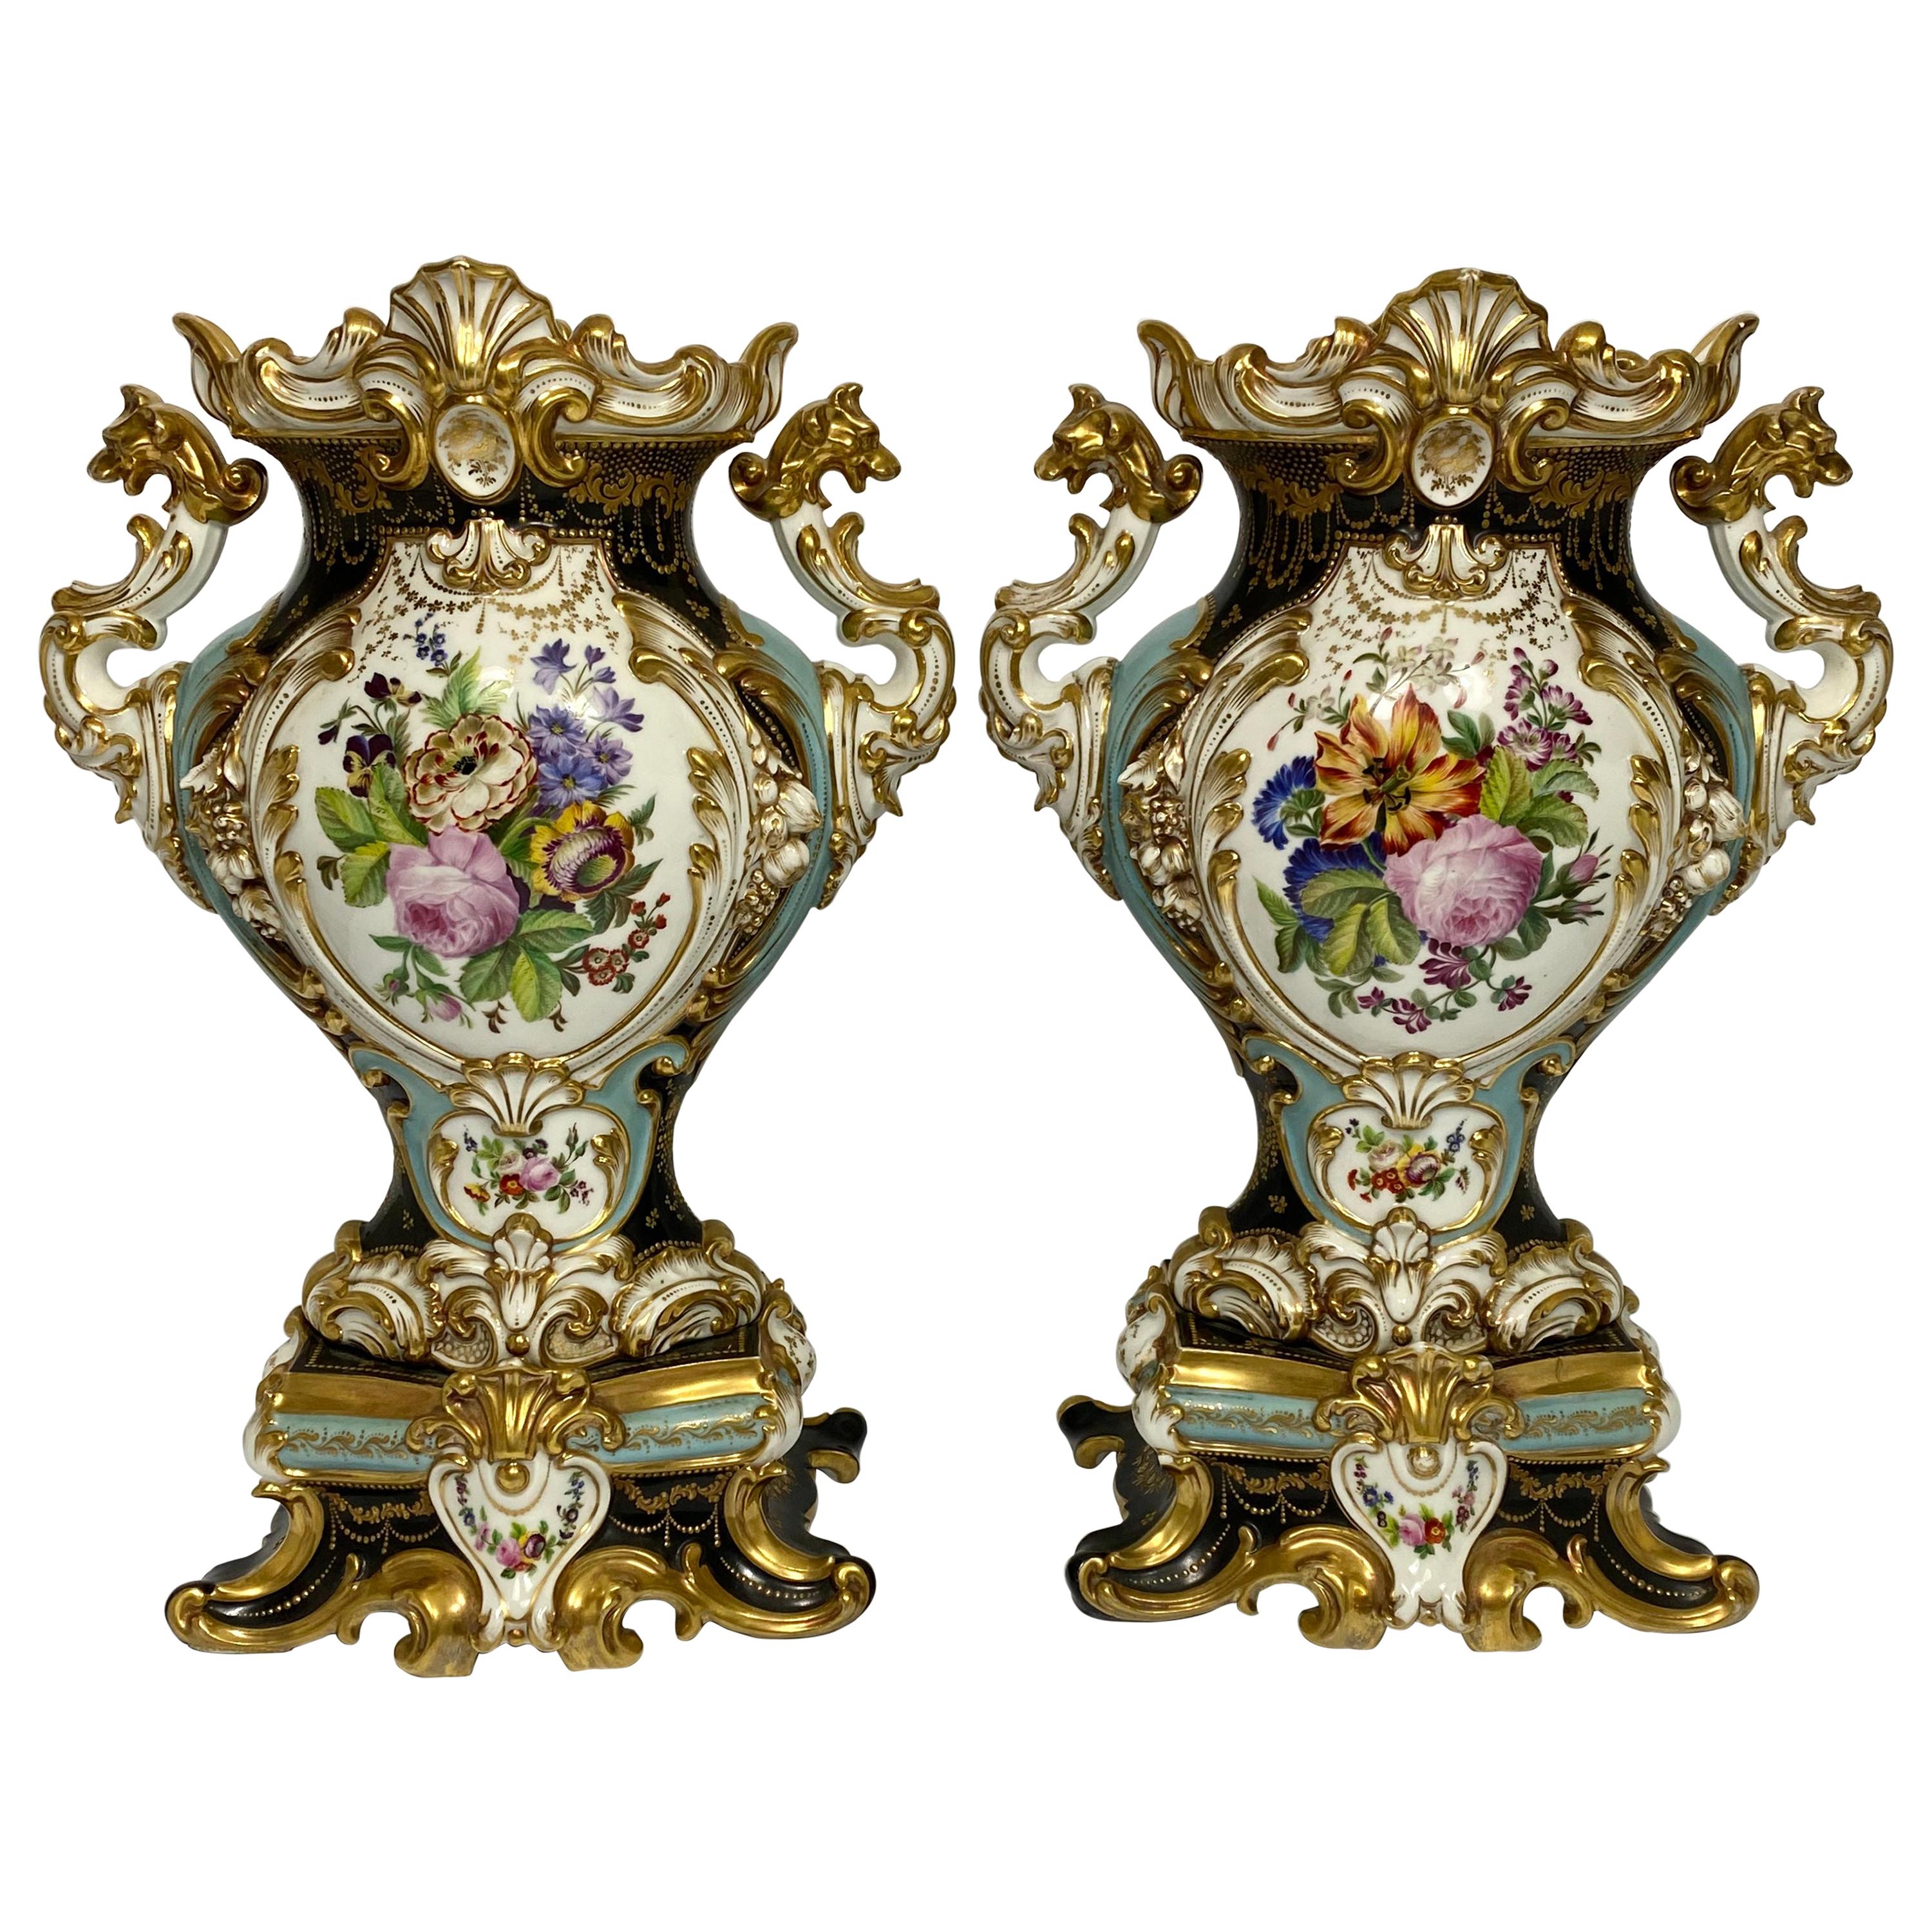 Pair of French Porcelain Vases, Probably Jacob Petit, circa 1840